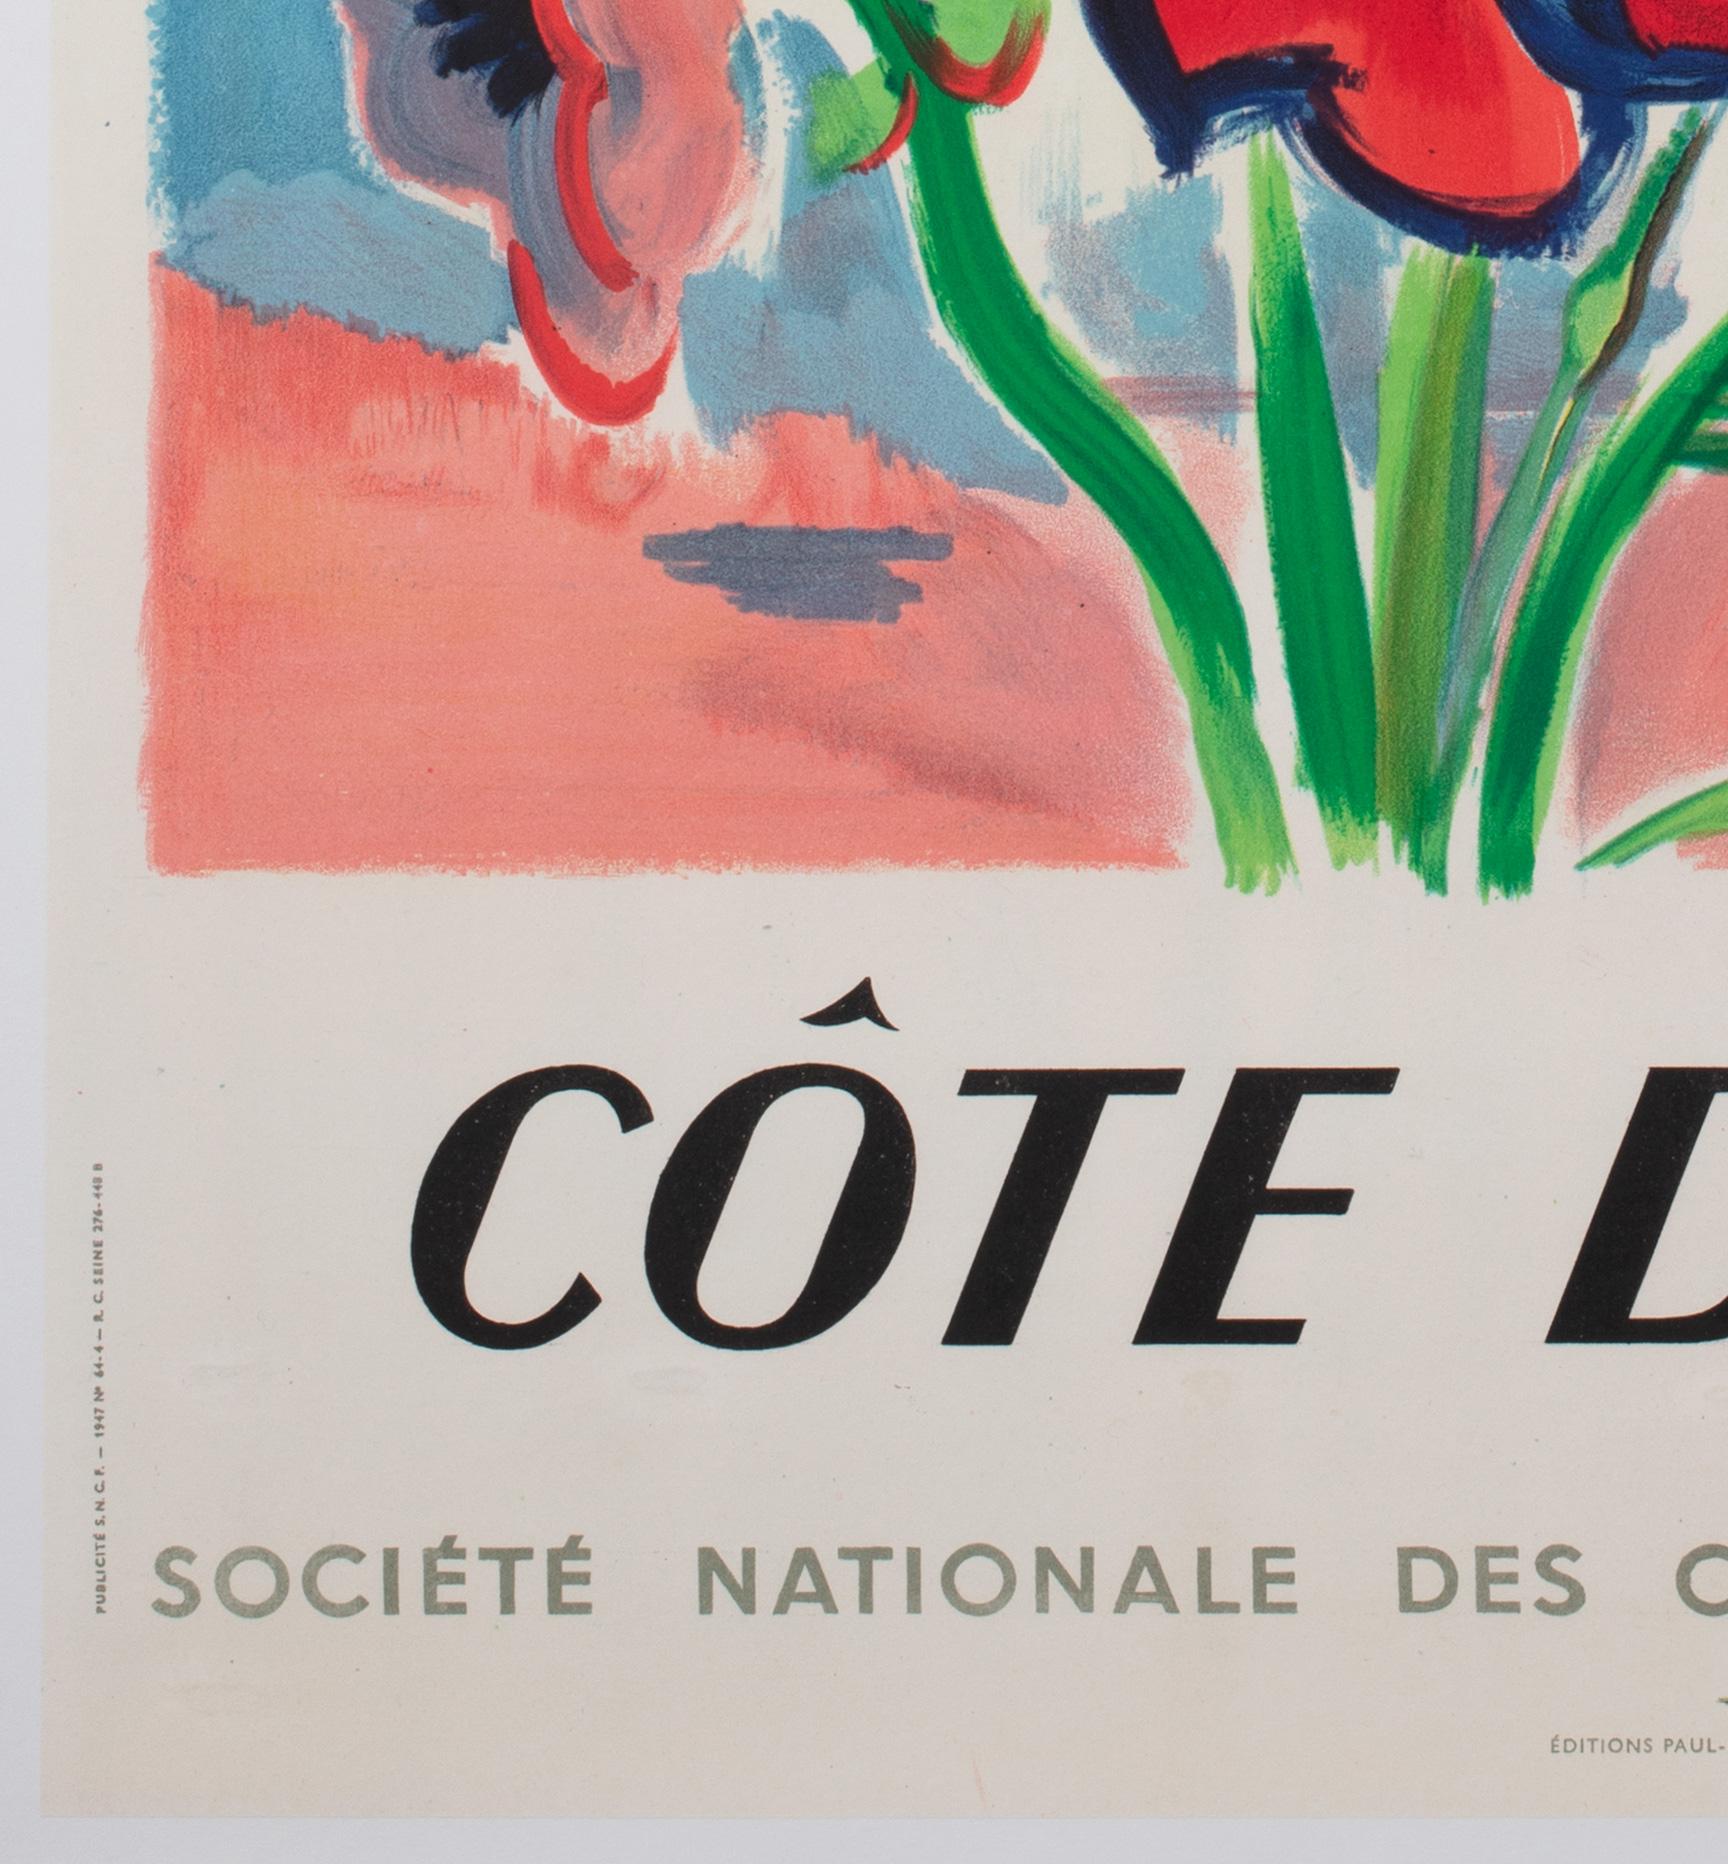 Cote d'Azur 1947 SNCF French Railway Travel Advertising Poster, Jal 2